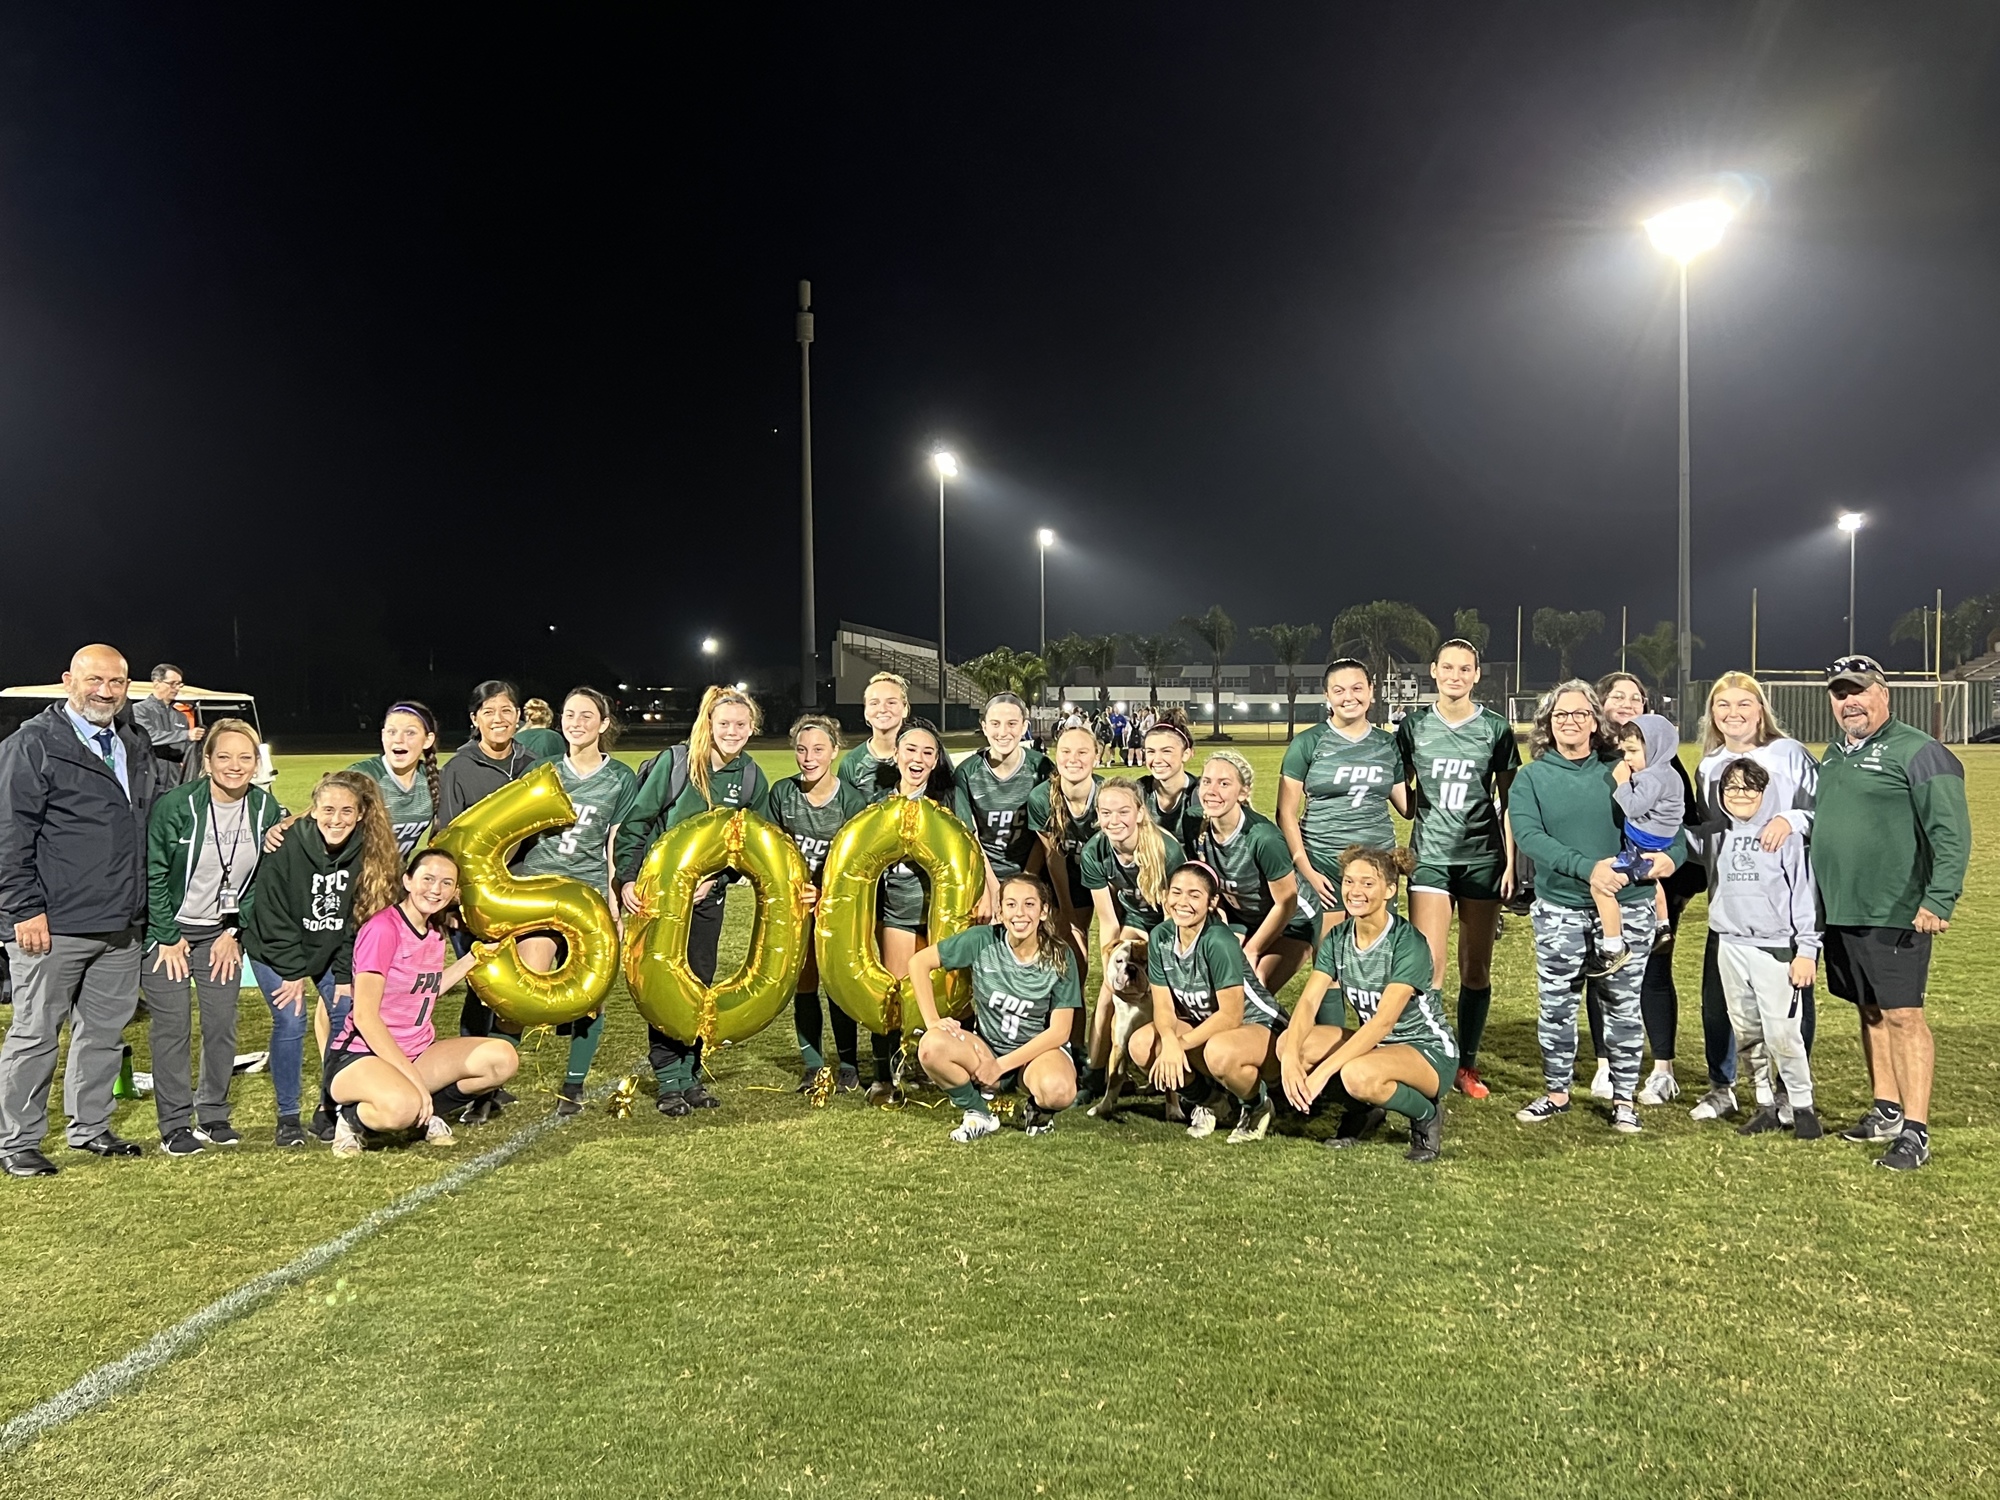 FPC administration and family joined the team to congratulate Pete Hald on his 500th win. Photos by Brian McMillan